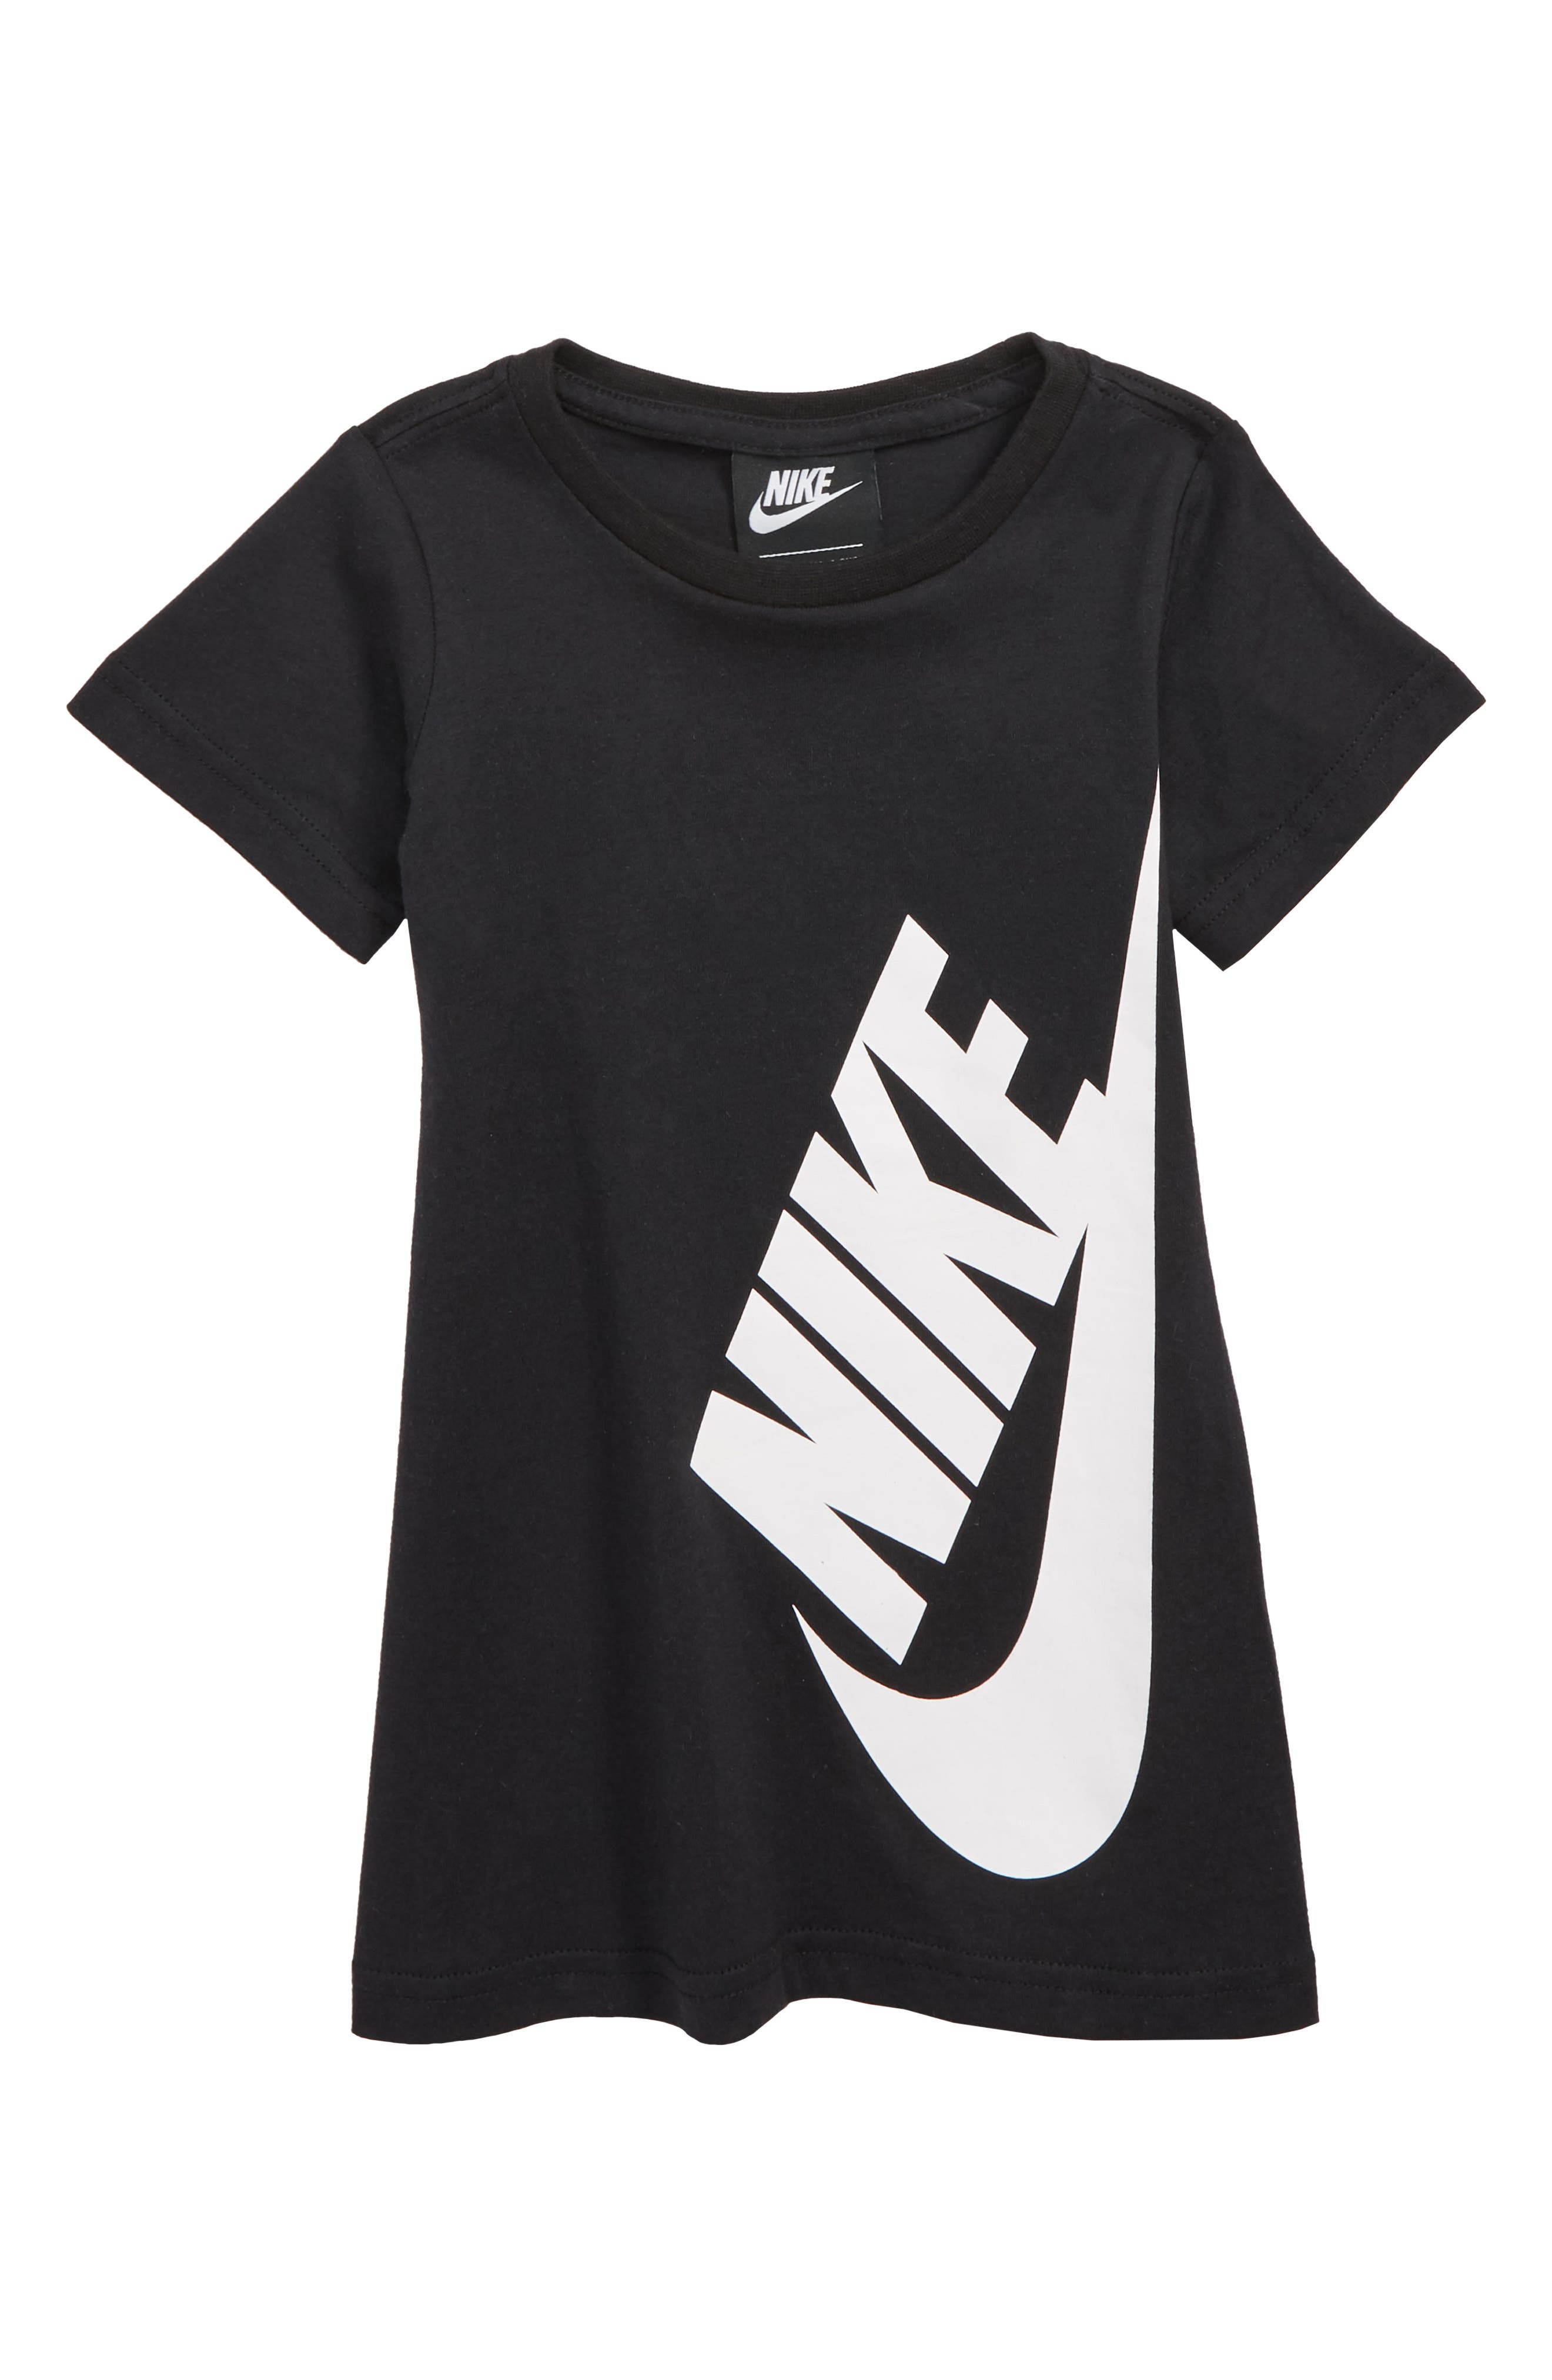 nike outfit toddler girl